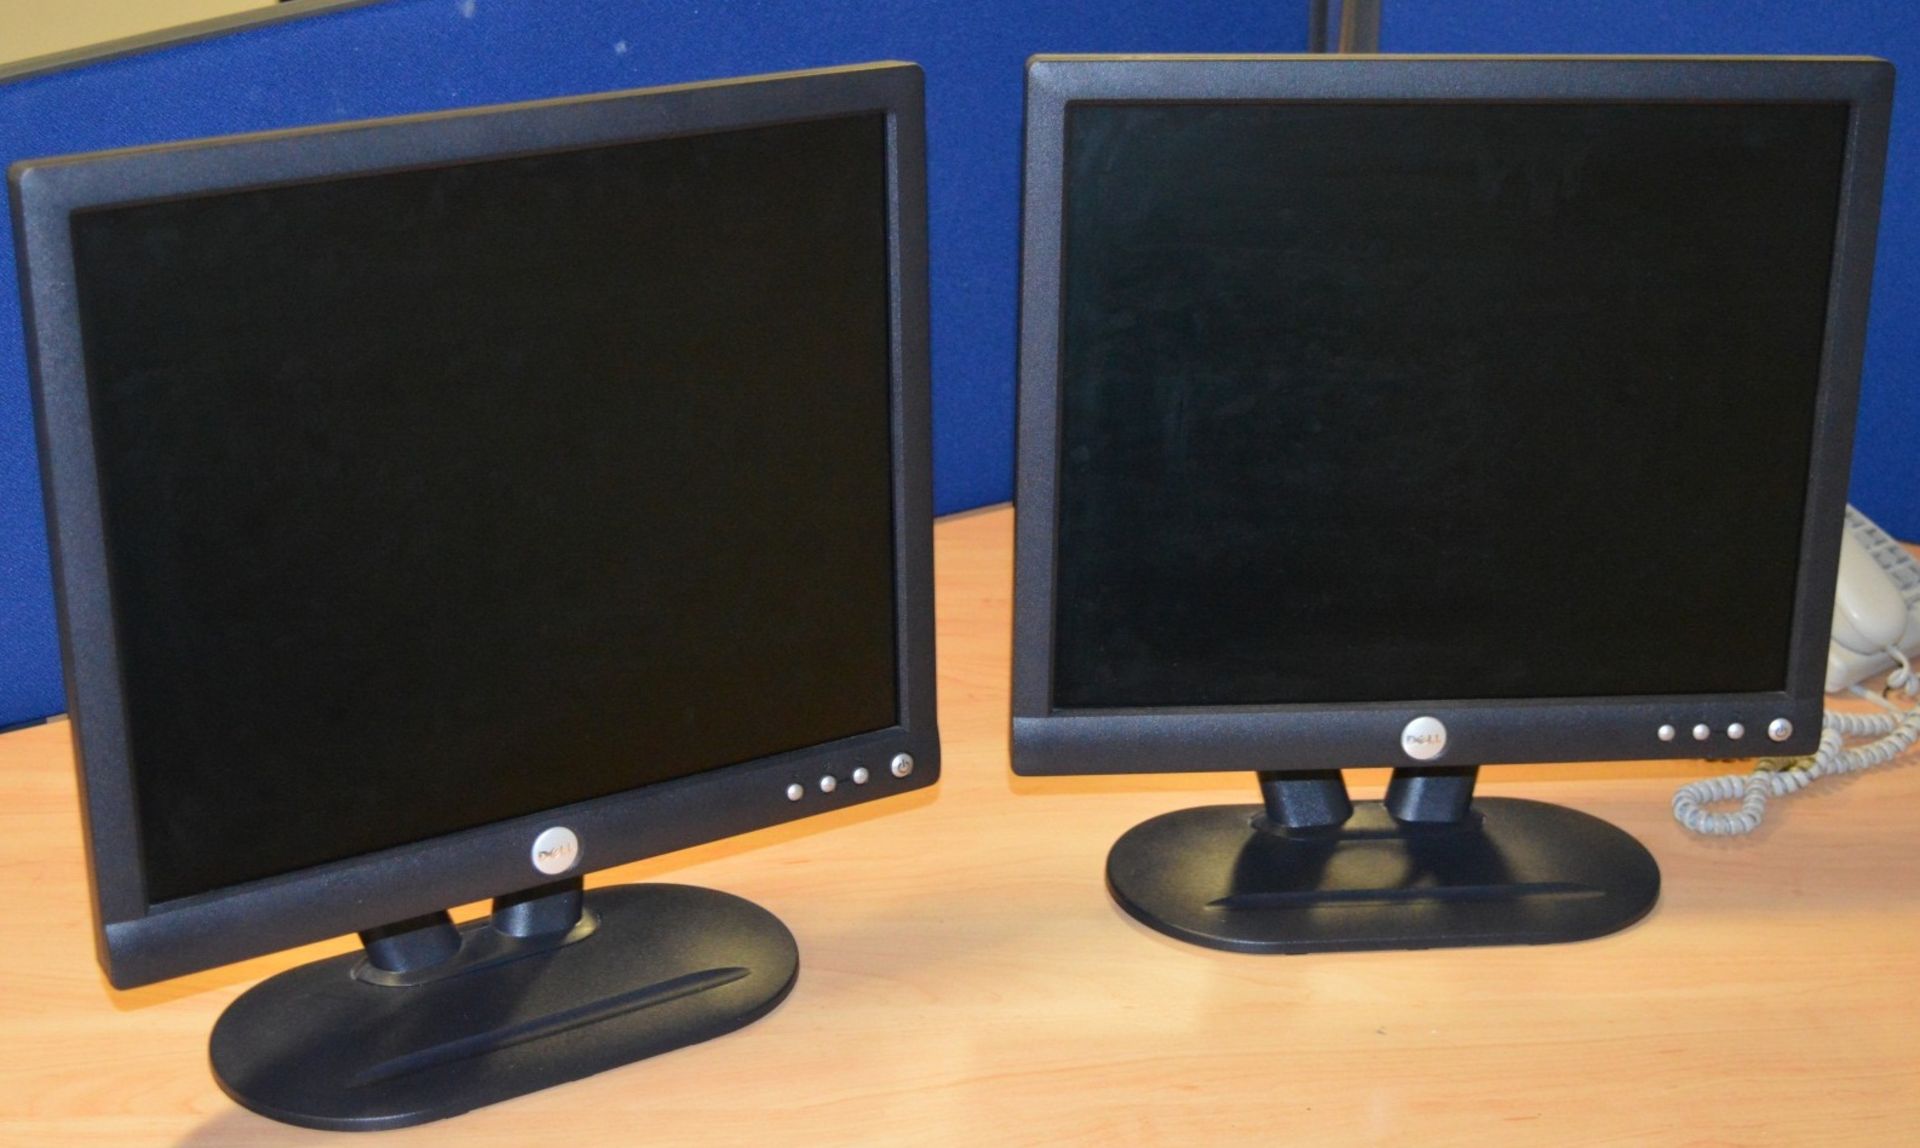 2 x Dell 17 Inch Flatscreen Computer Monitors - Without Cables - CL300 - Ref S067 - Location: